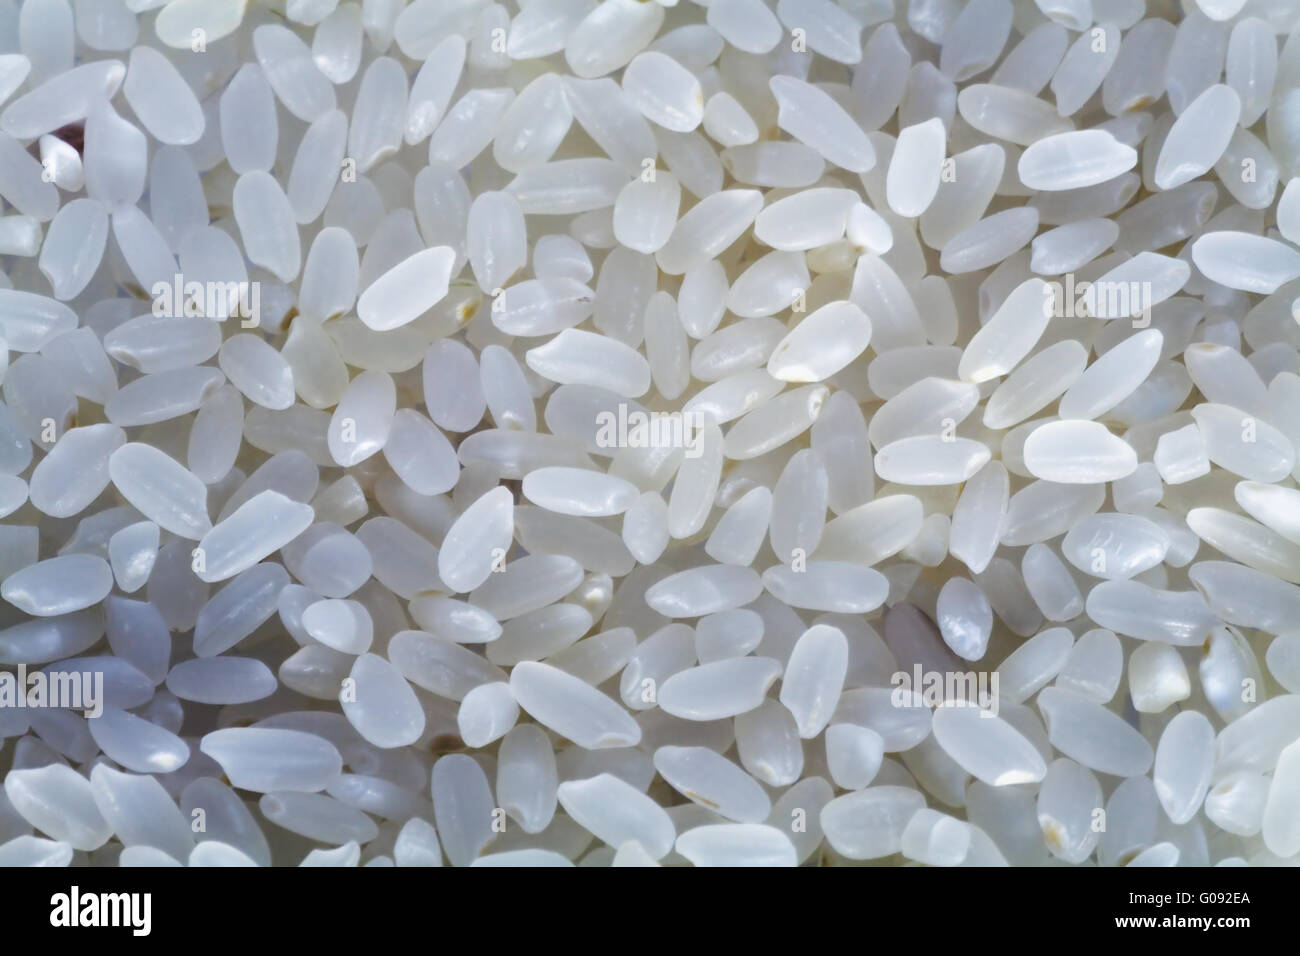 White selected rice grains as a food background Stock Photo